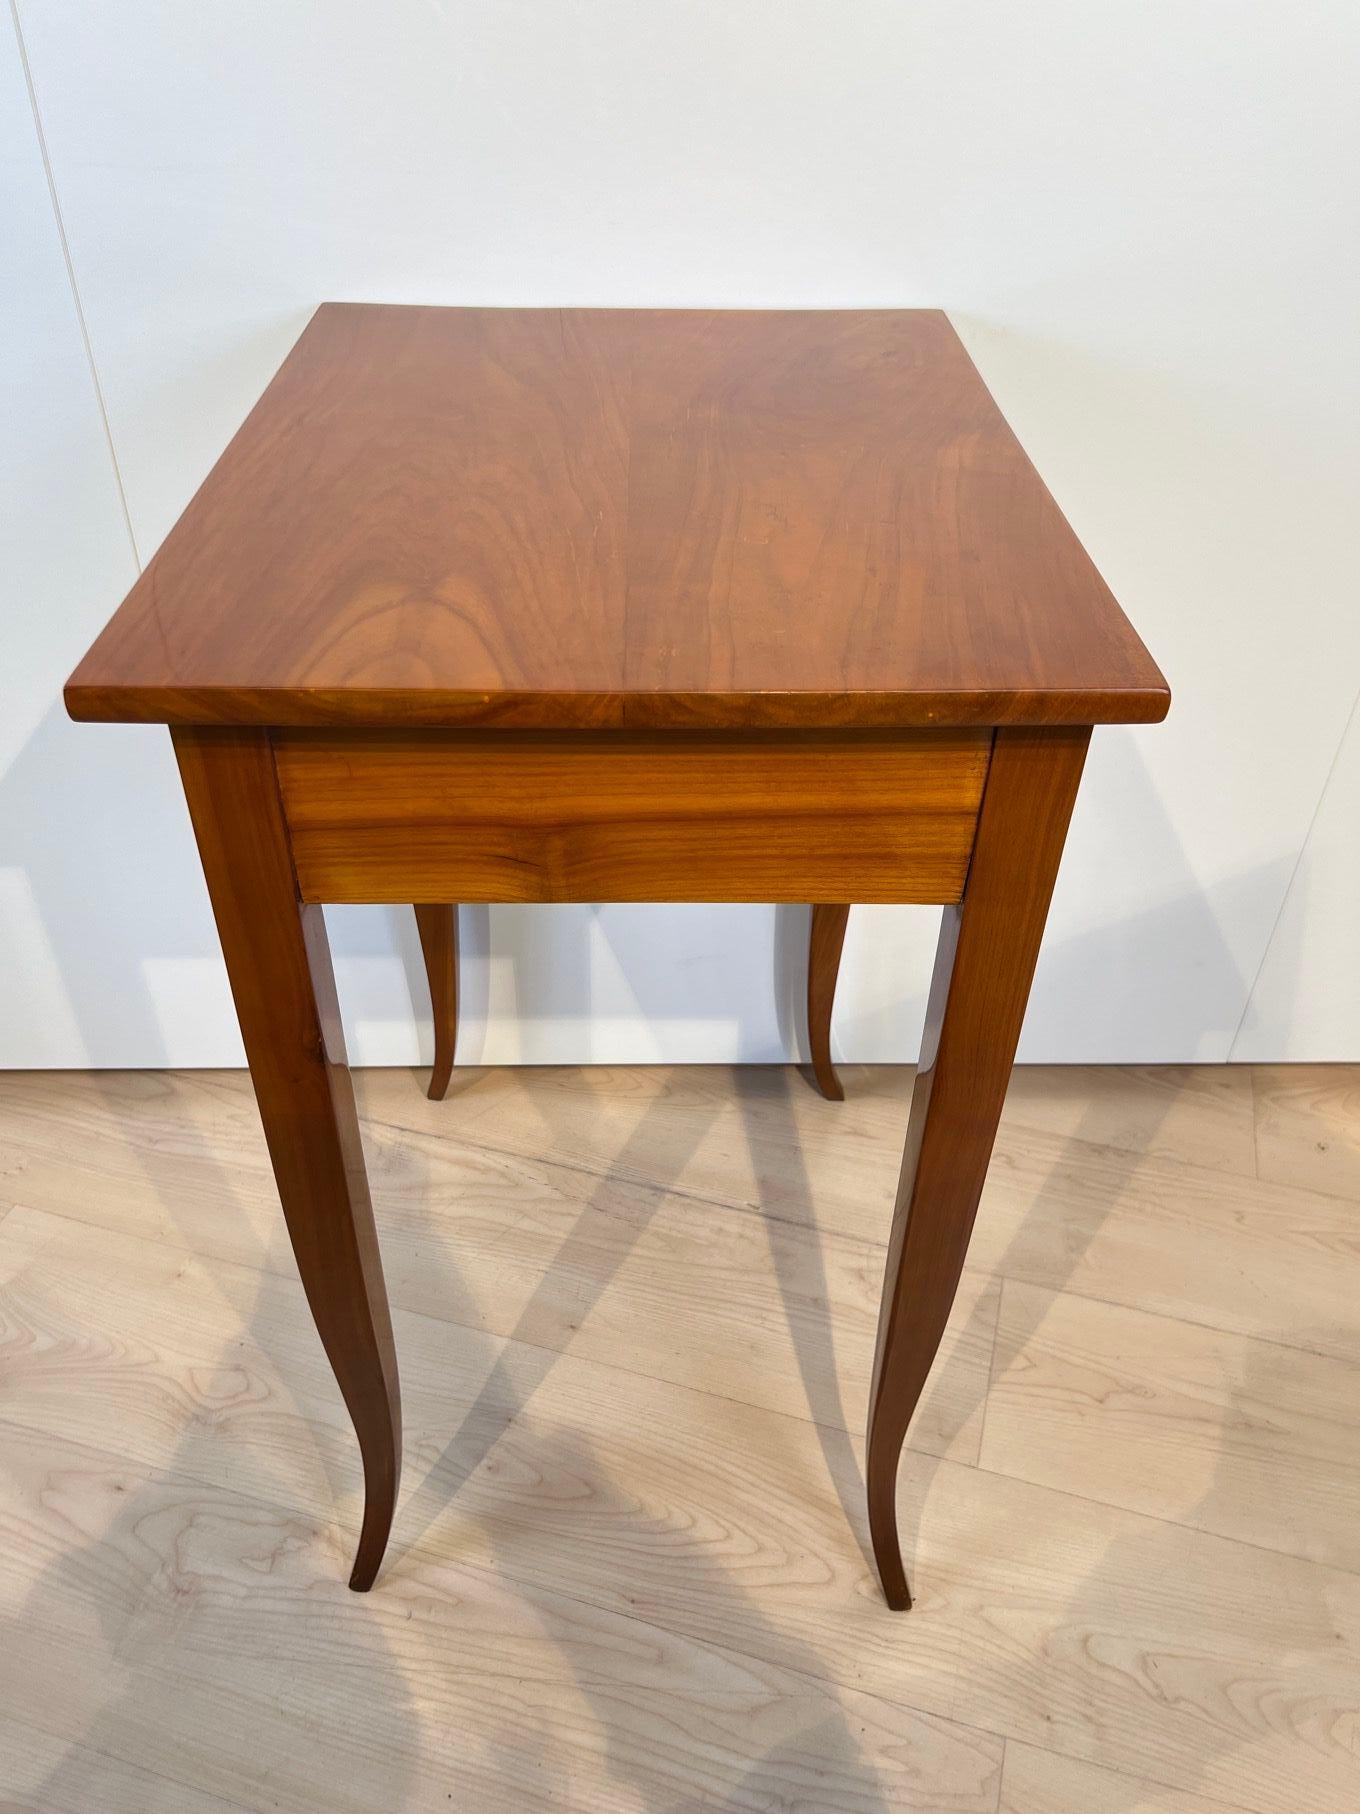 Biedermeier Side Table with Drawer, Cherry Wood, South Germany circa 1825 For Sale 7